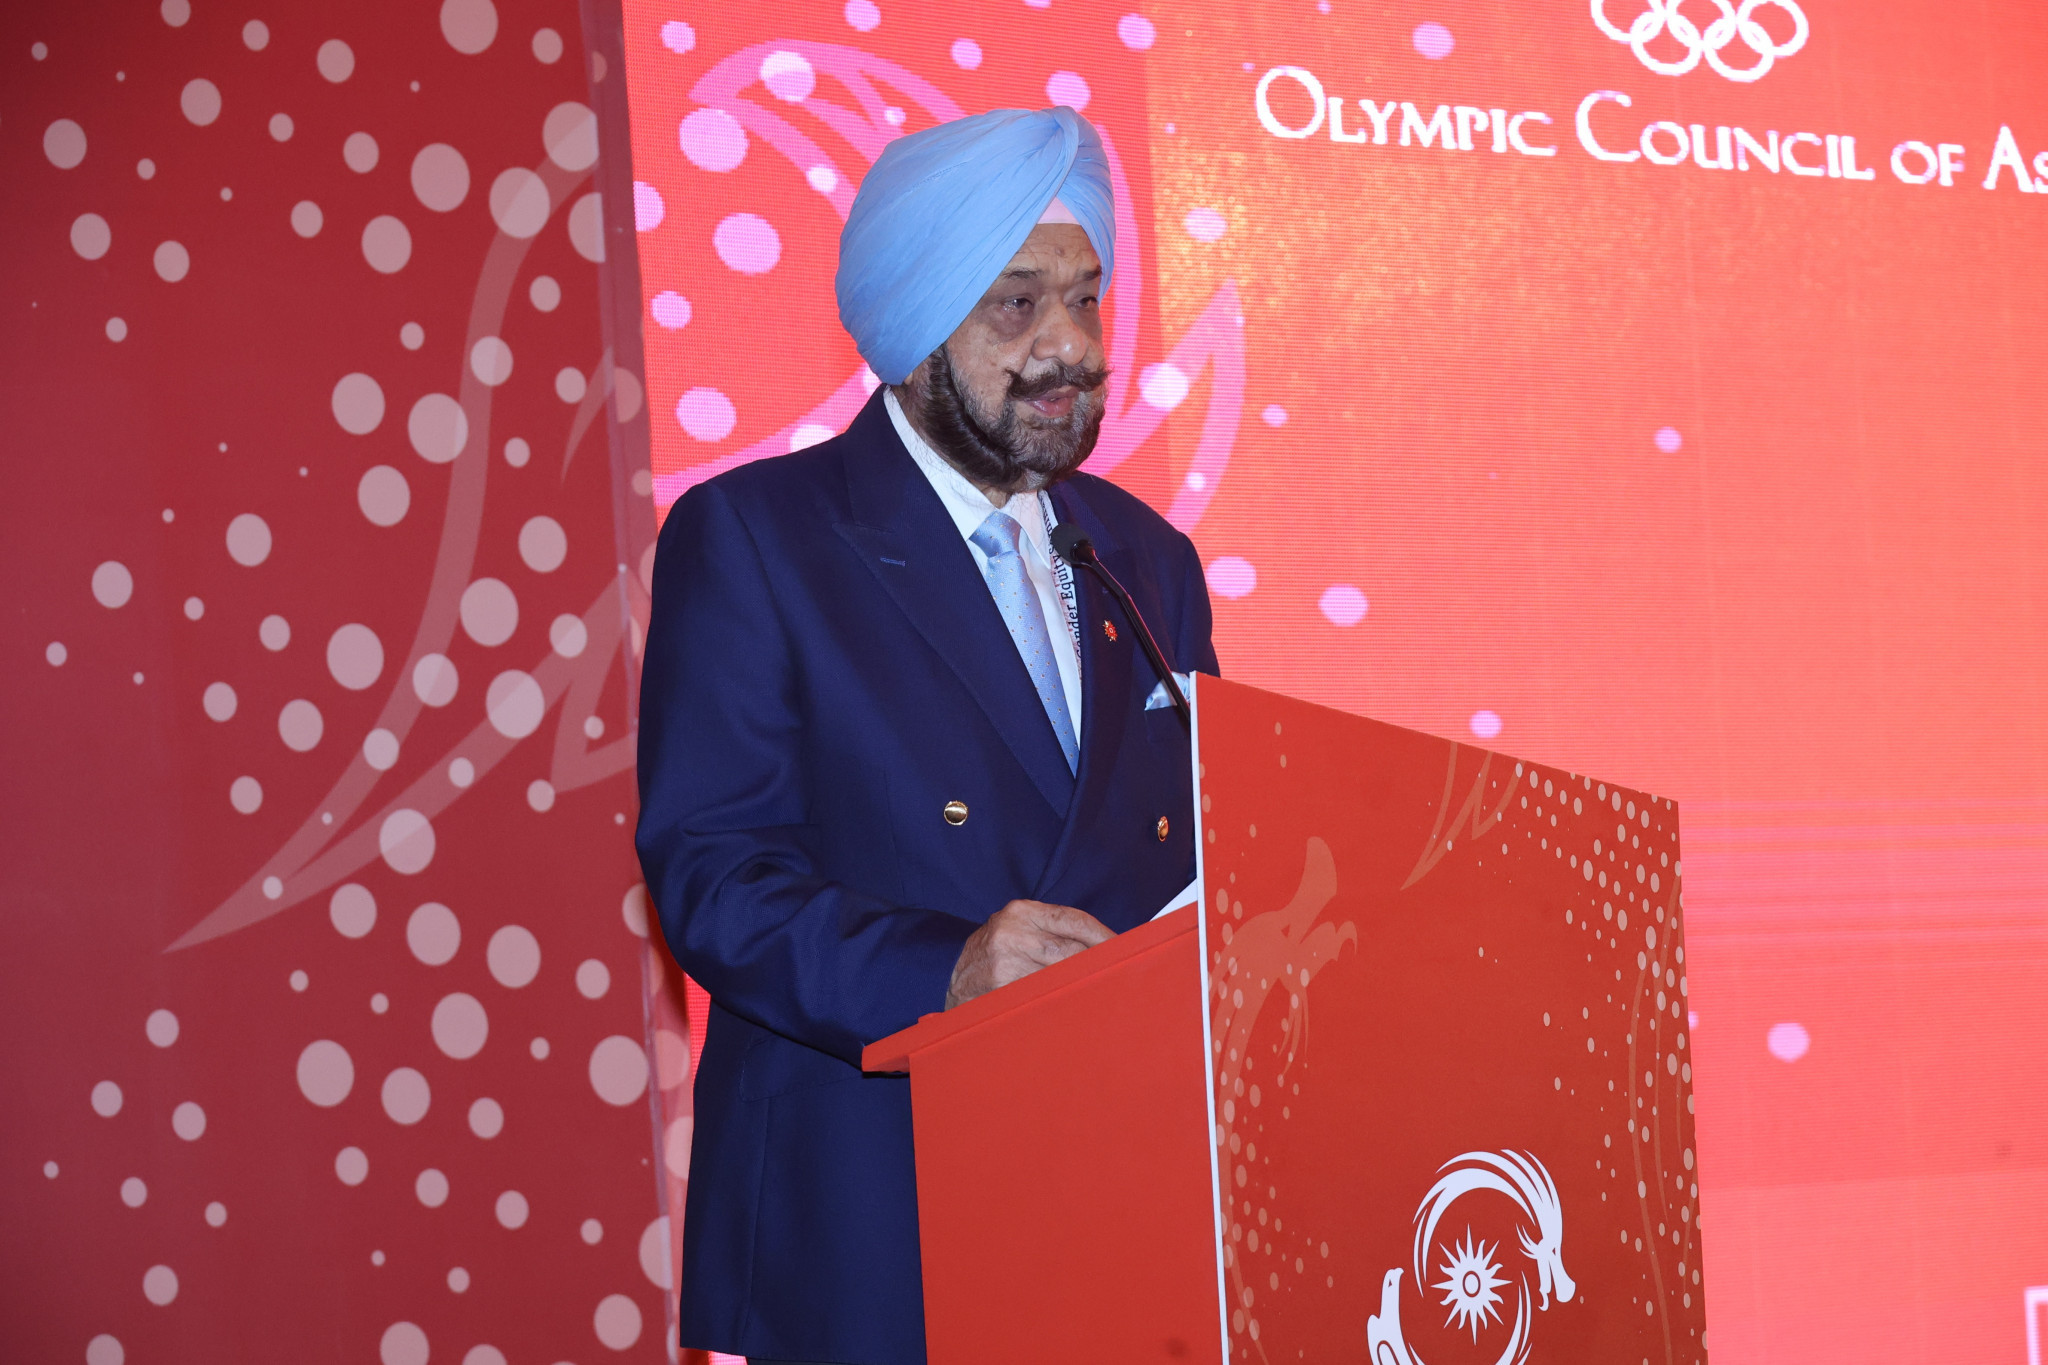 OCA Acting President Randhir Singh has previously said that the participation of Russian and Belarusian athletes at Hangzhou 2022 would not impact on Asian competitors but some participating nations have expressed concerns ©OCA